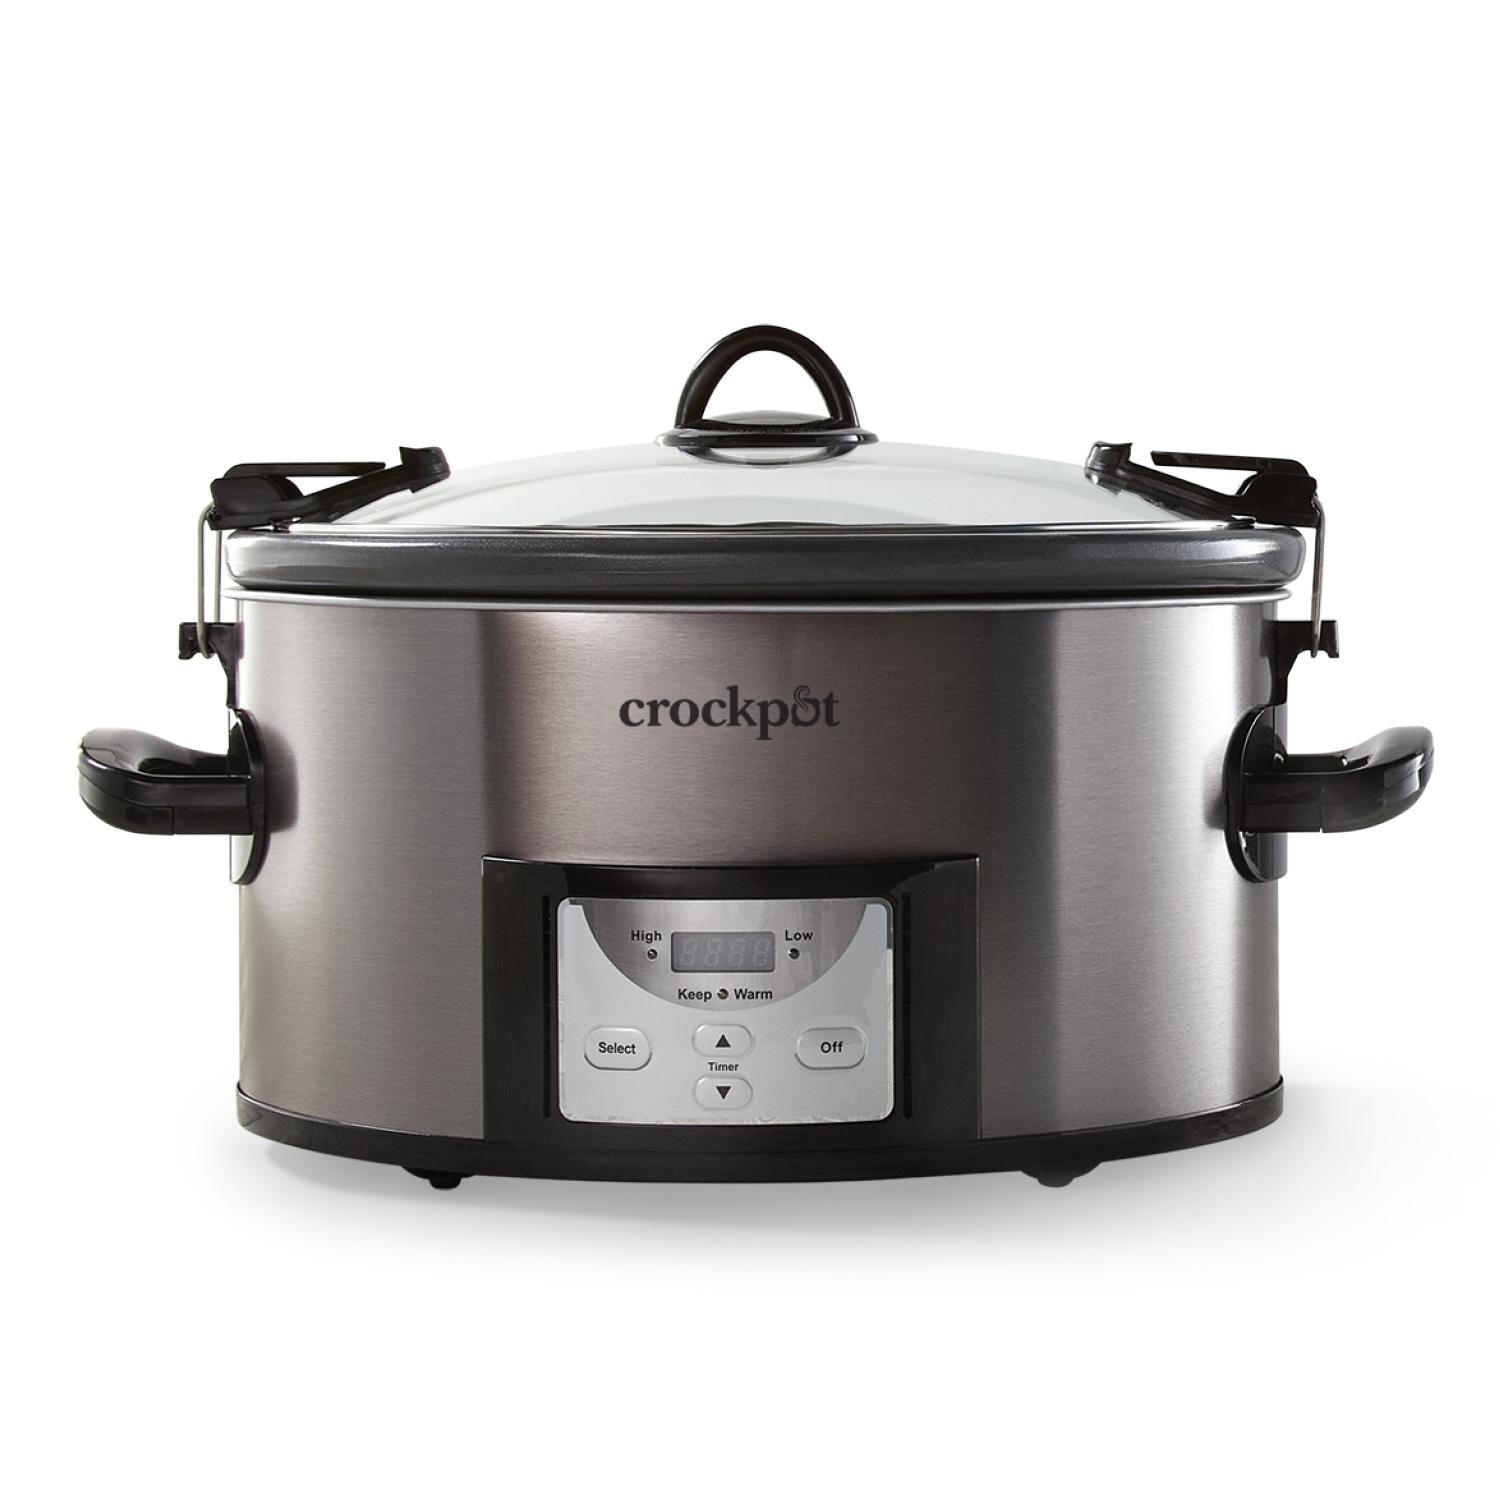 https://ak1.ostkcdn.com/images/products/is/images/direct/6b8f605f635c8e26ee3bf9fd5d3826ab1281dce6/Crockpot-7-Quart-Easy-to-Clean-Cook-%26-Carry-Slow-Cooker%2C-Black-Stainless-Steel.jpg